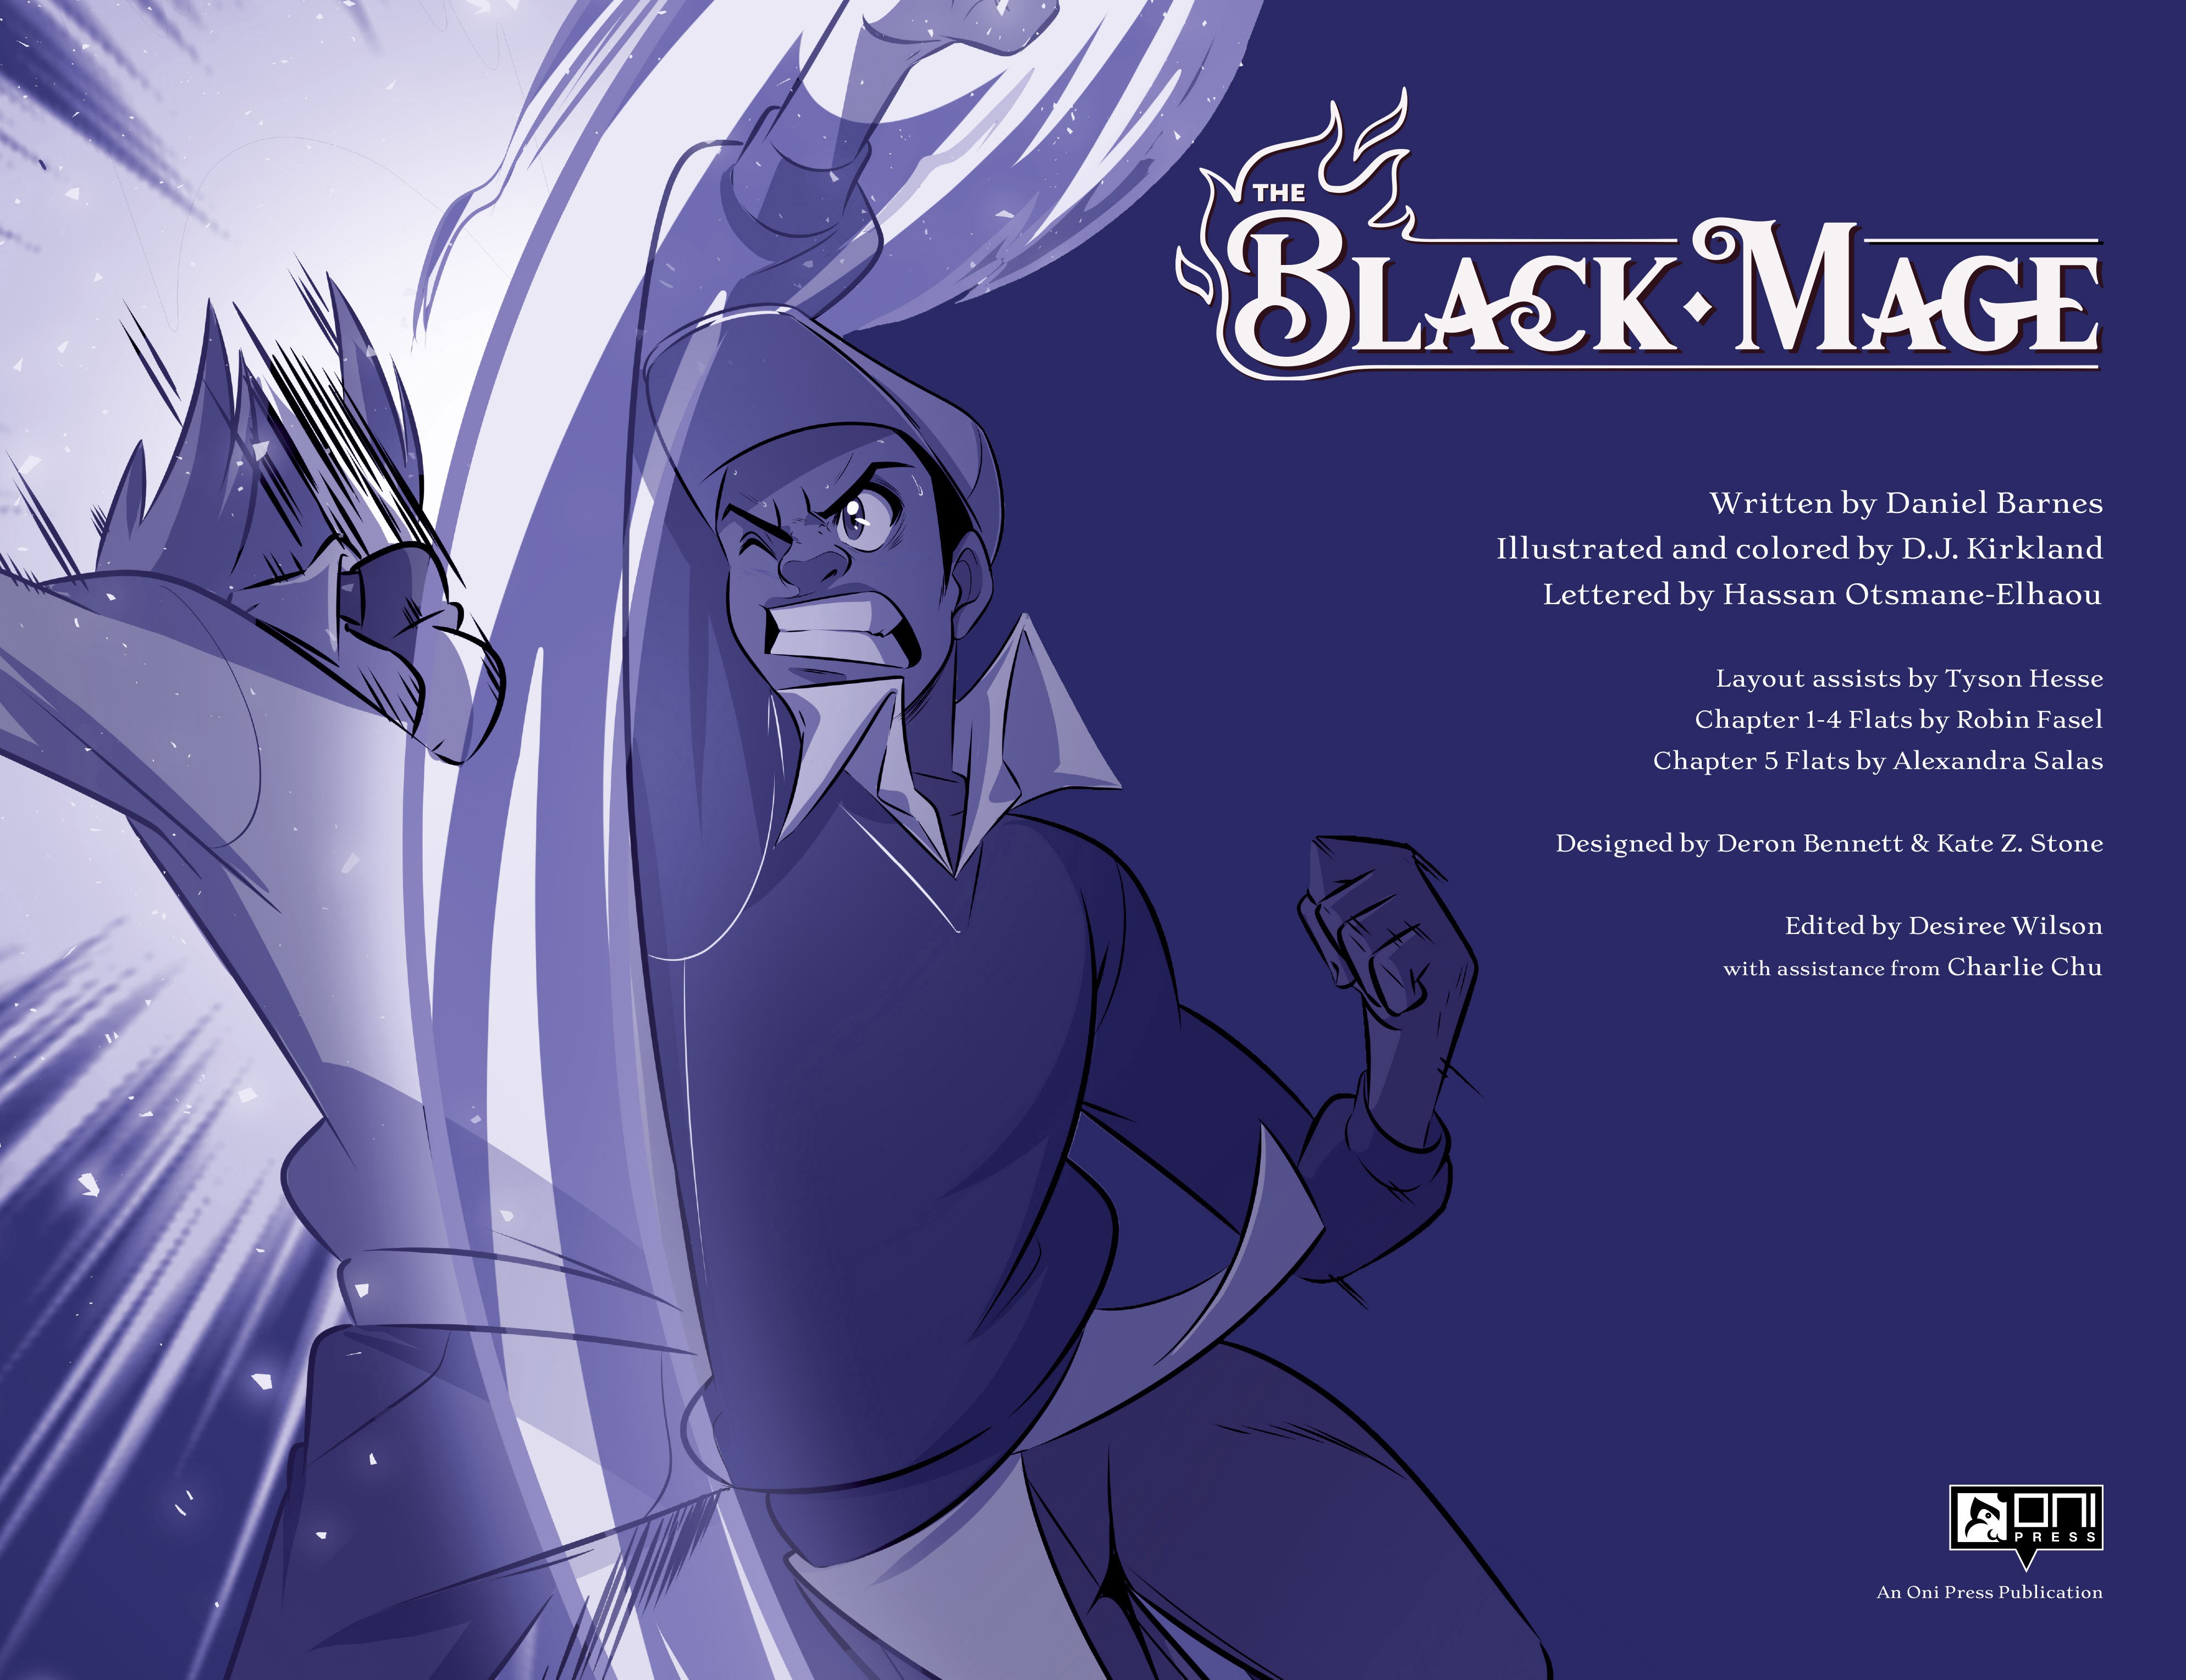 Read online The Black Mage comic -  Issue # TPB - 3